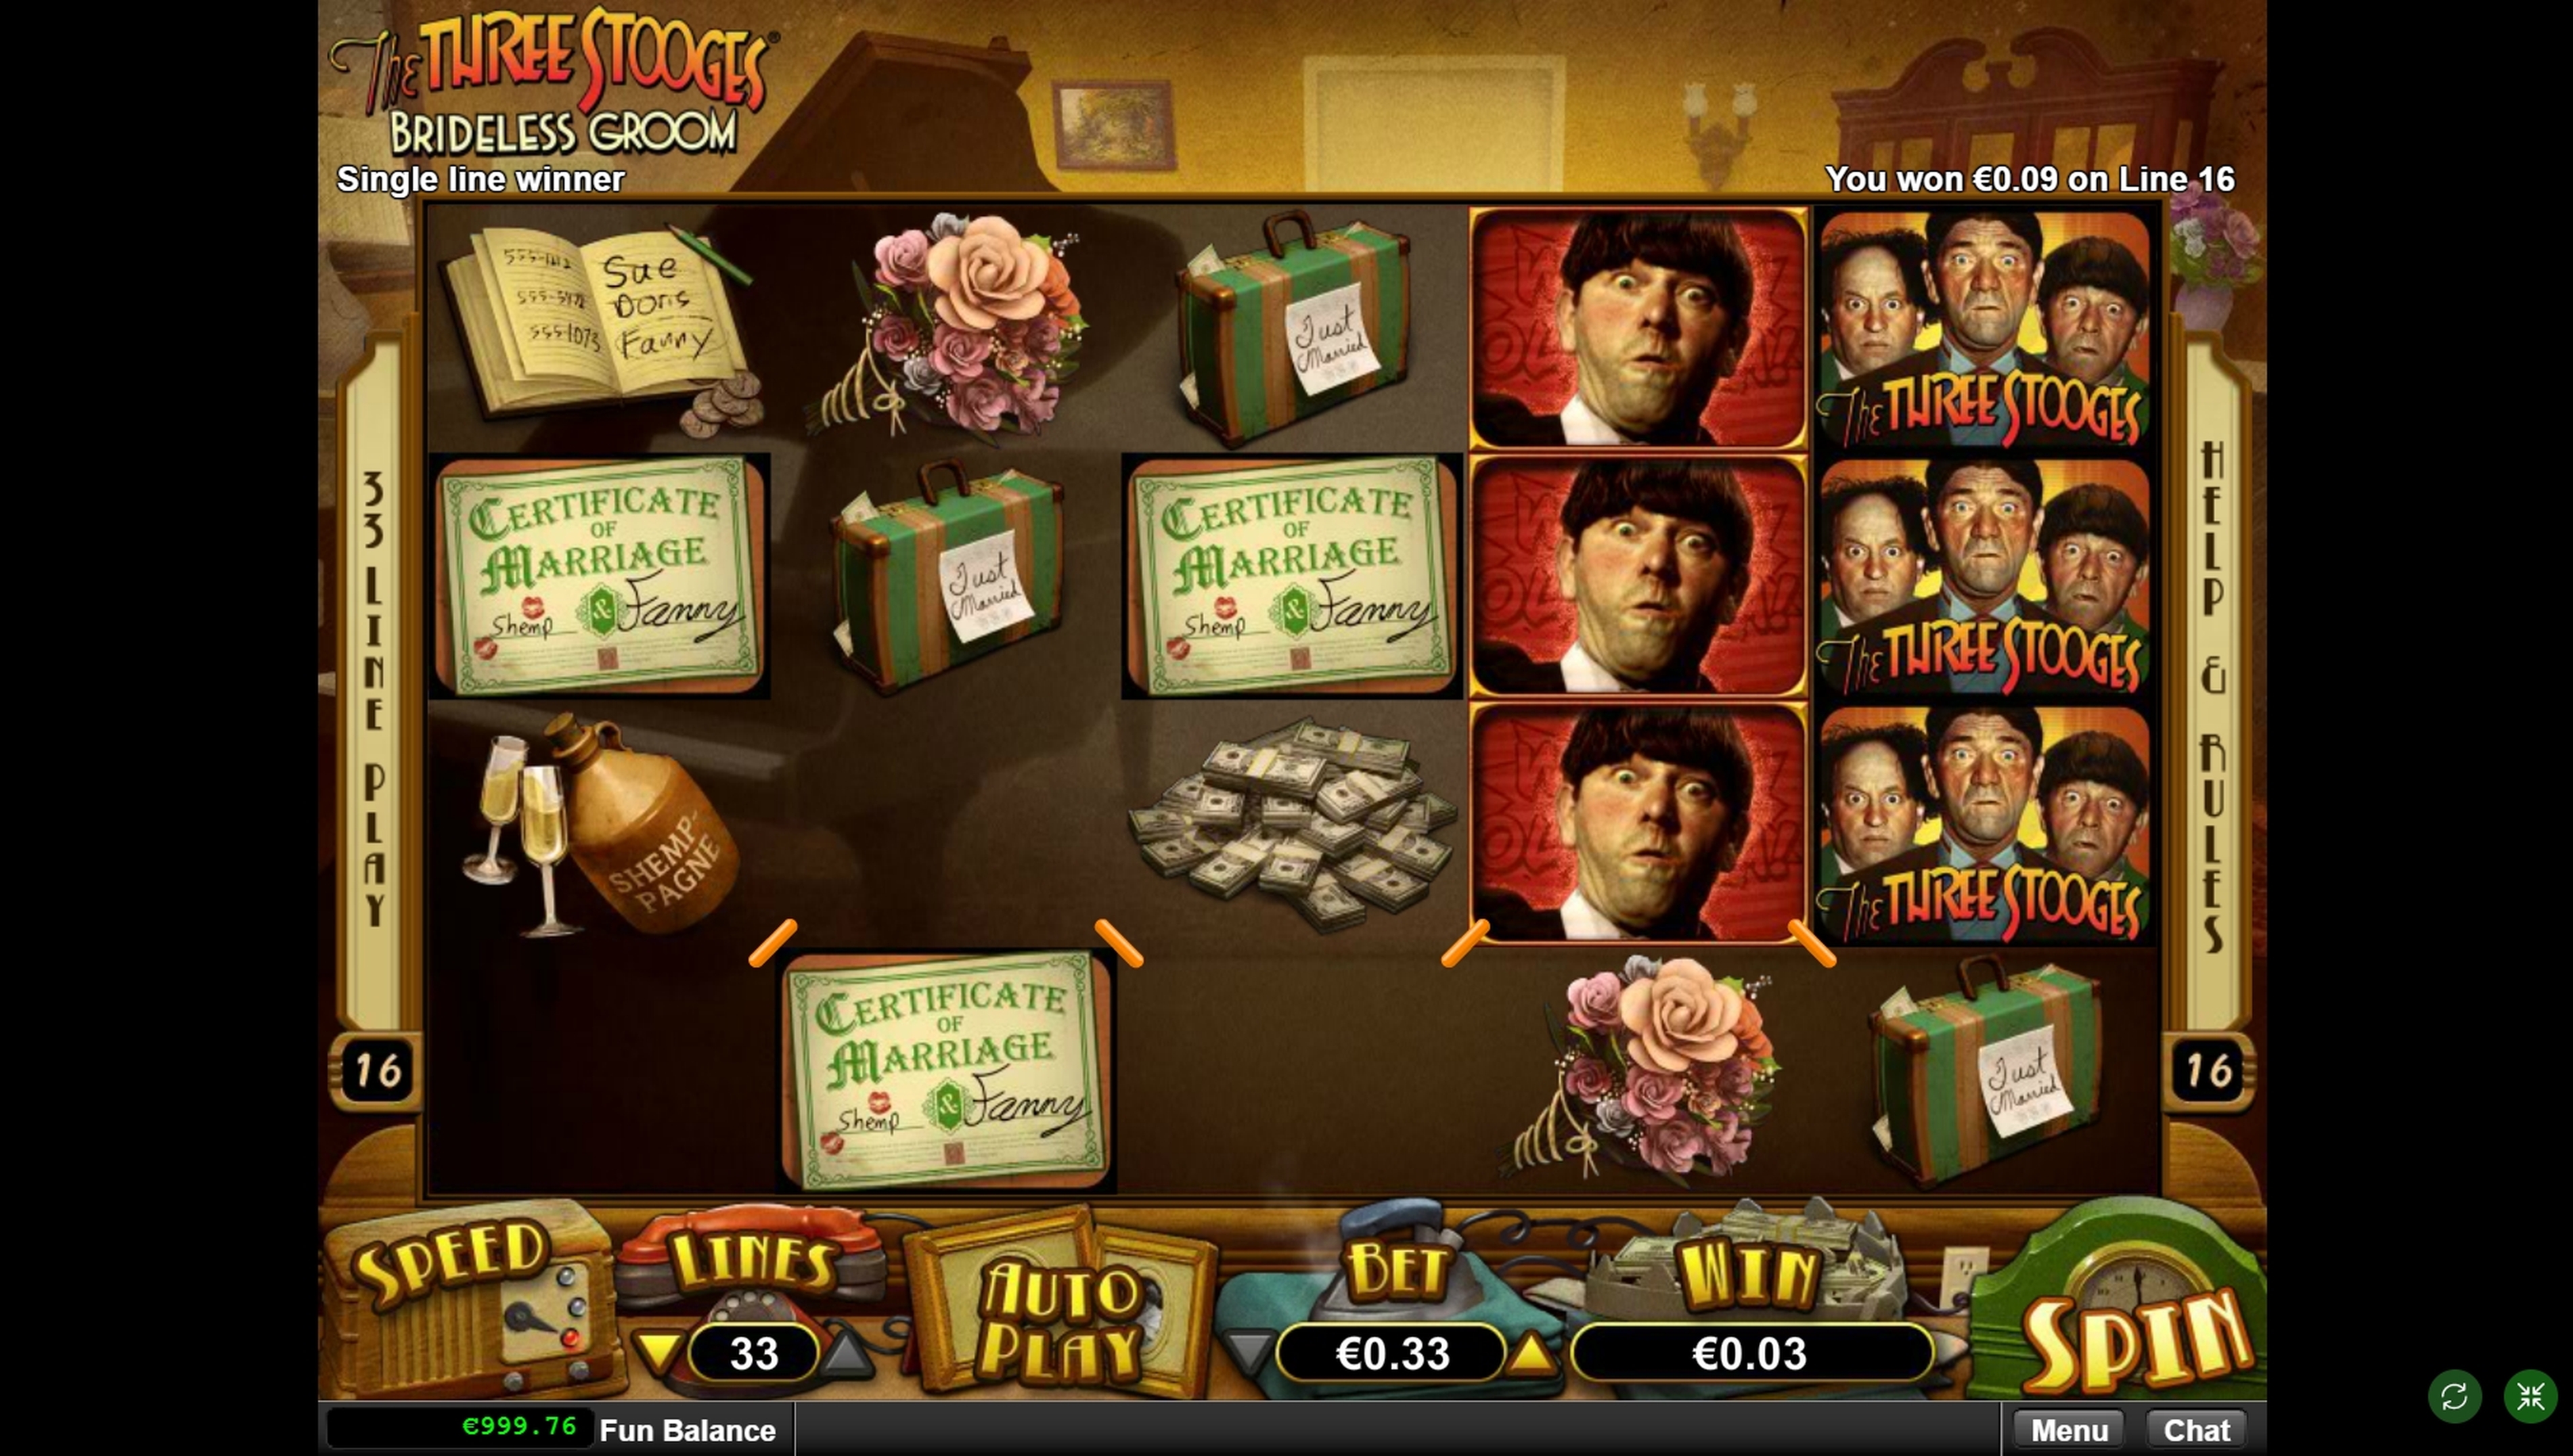 Win Money in The Three Stooges Brideless Groom Free Slot Game by Real Time Gaming